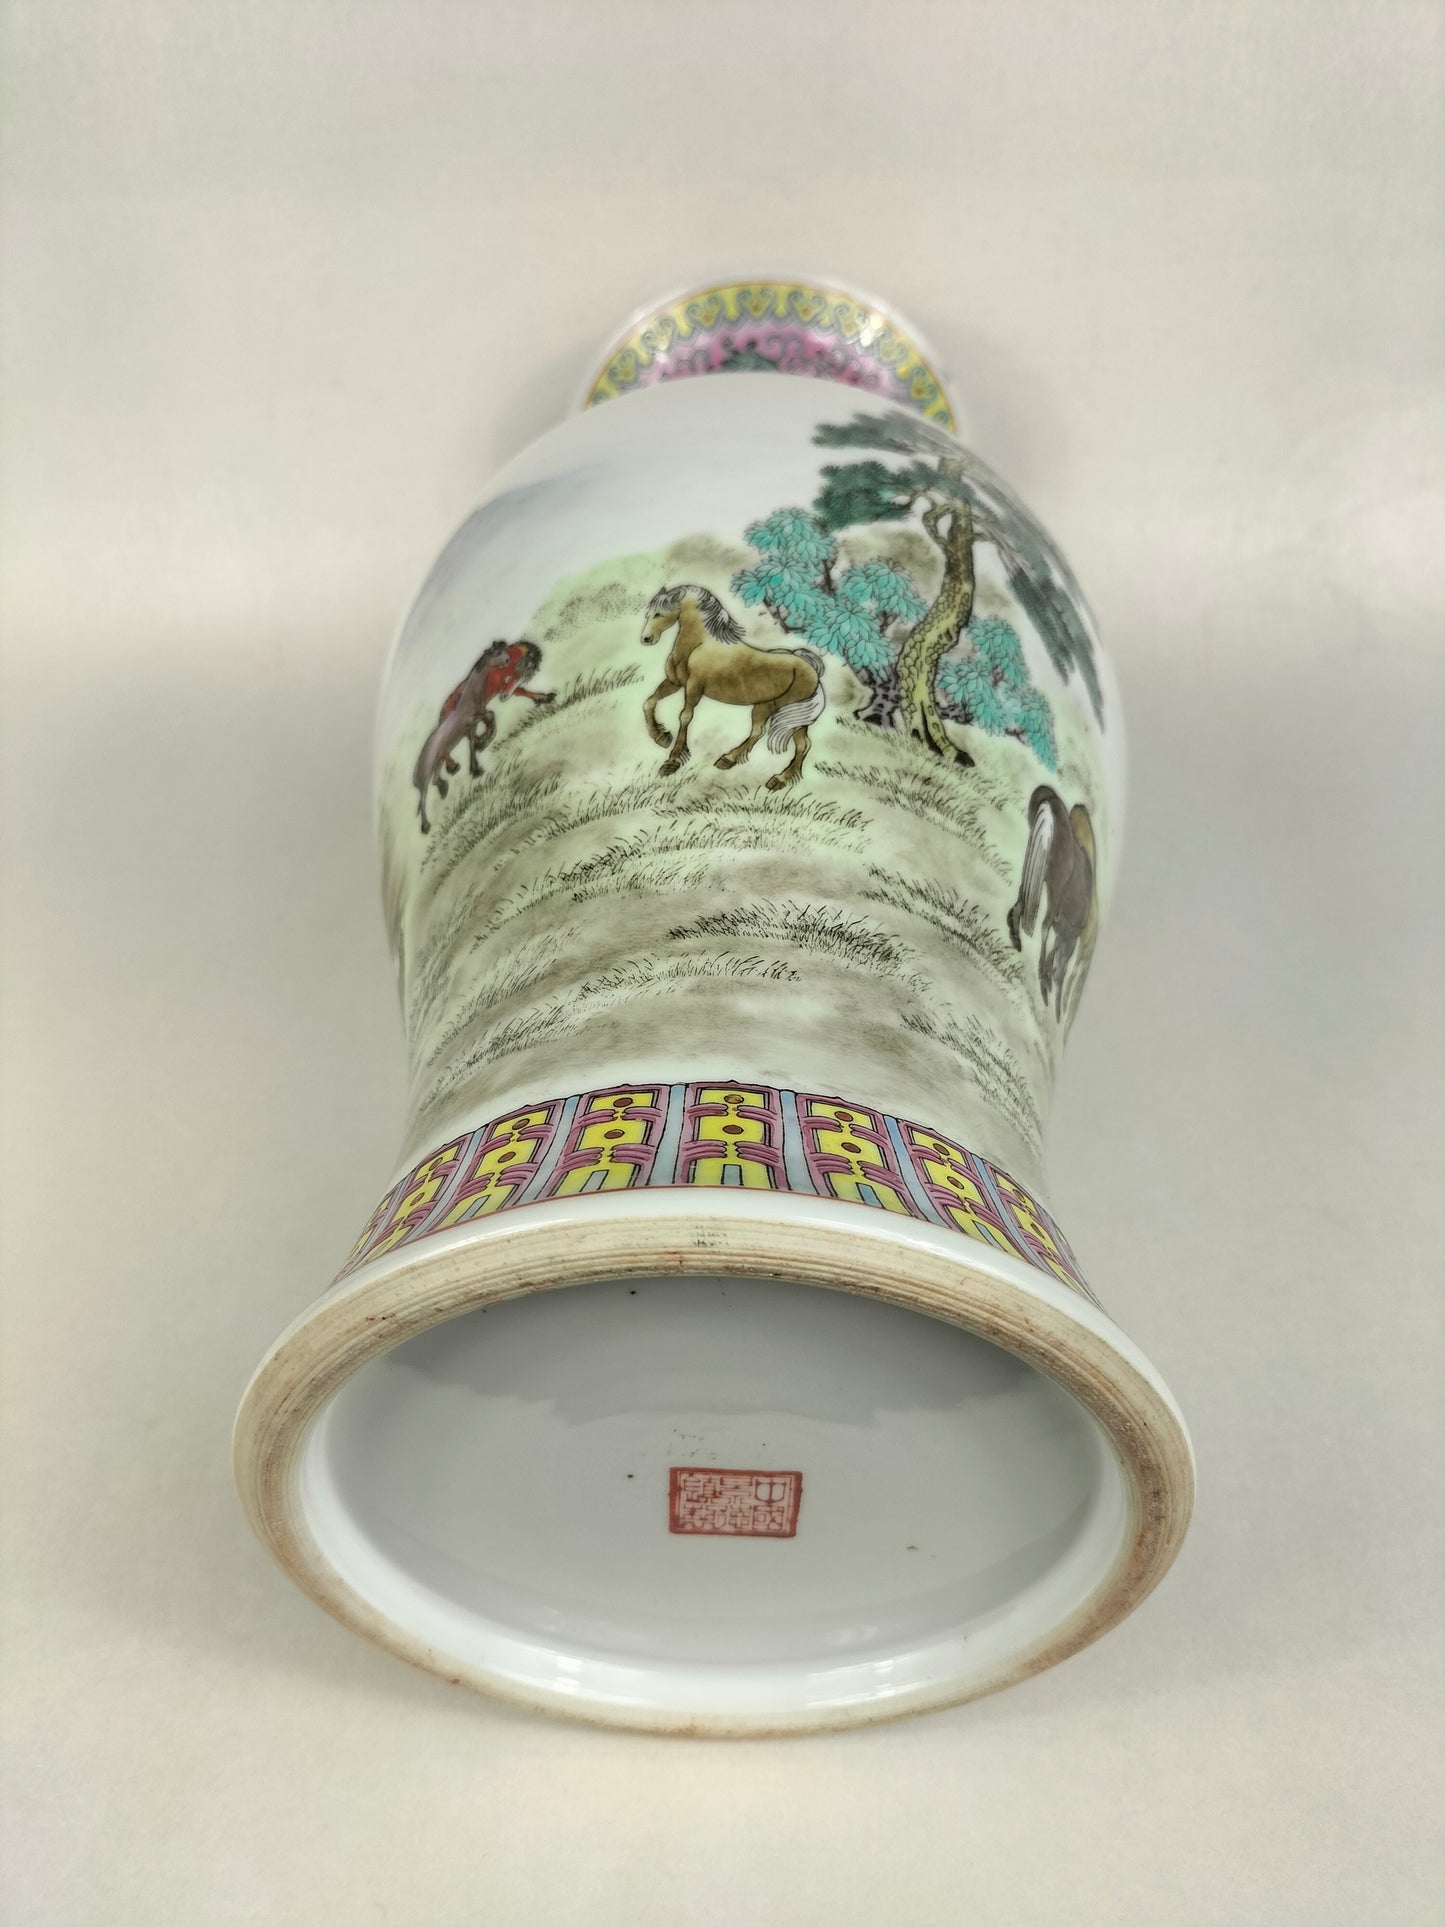 Chinese famille rose vase decorated with horses // Jingdezhen - 20th century